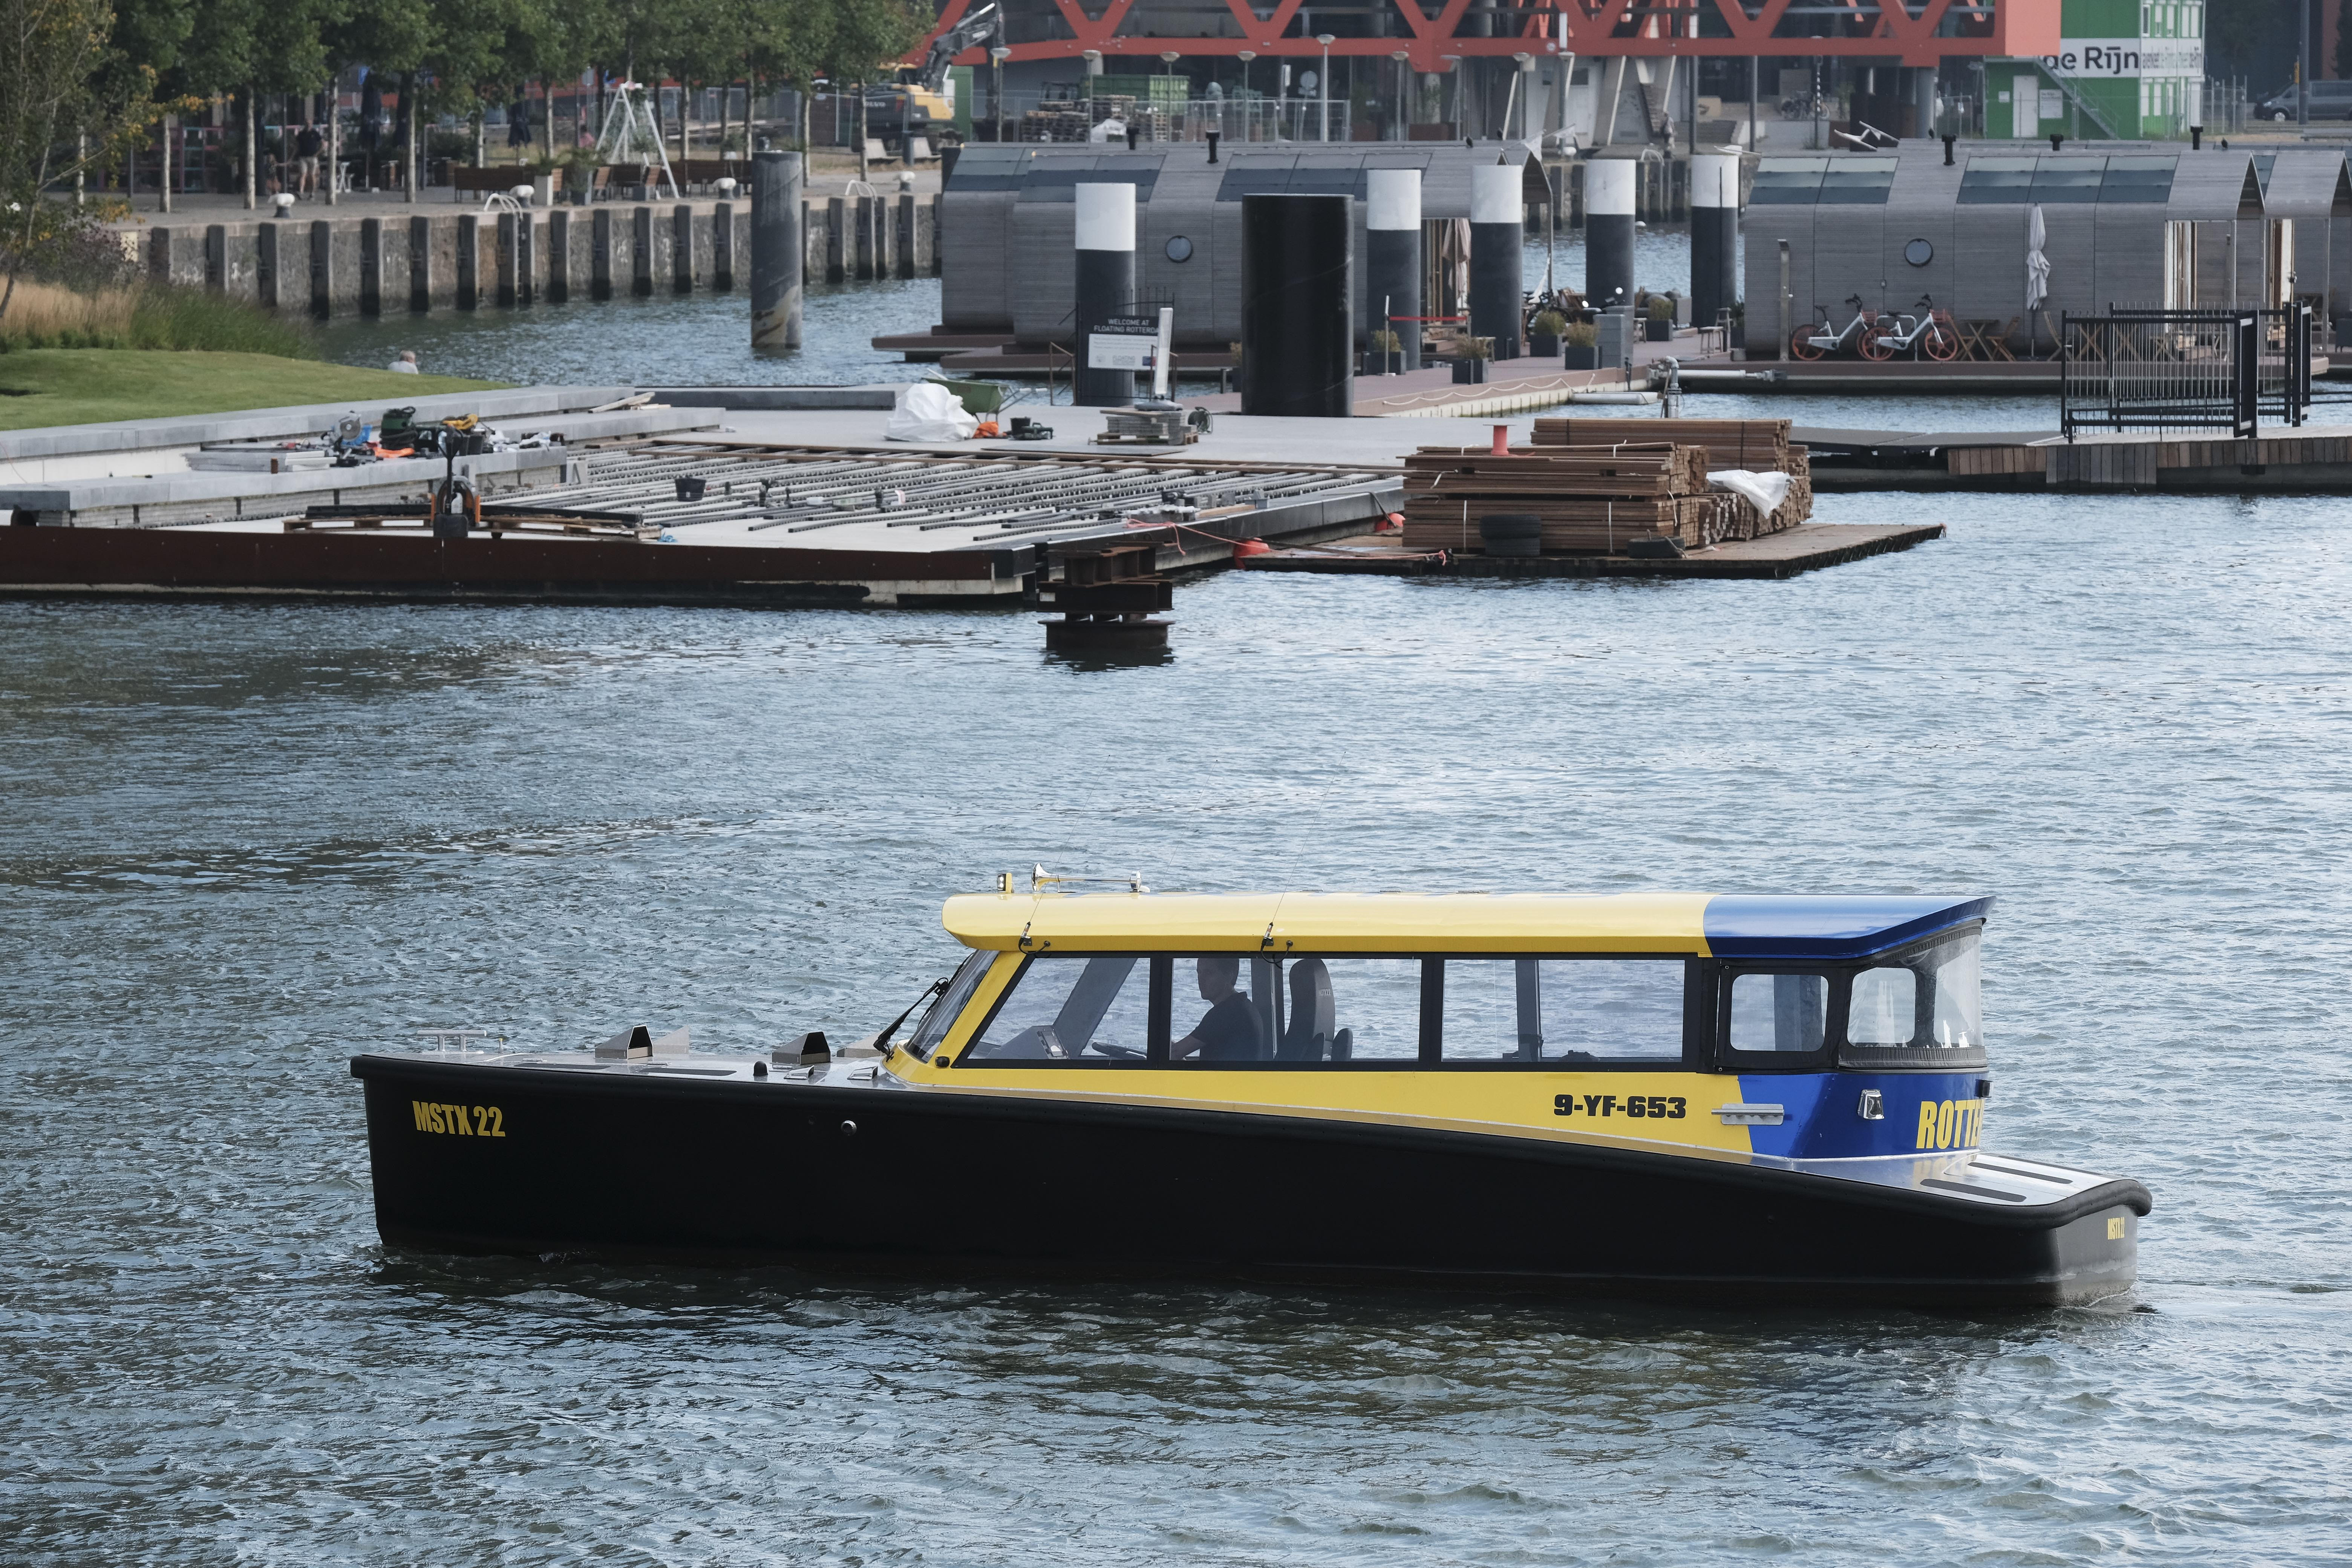 Photo of the boat: Plug-In Hybride Watertaxi (PWH) of Watertaxi Rotterdam